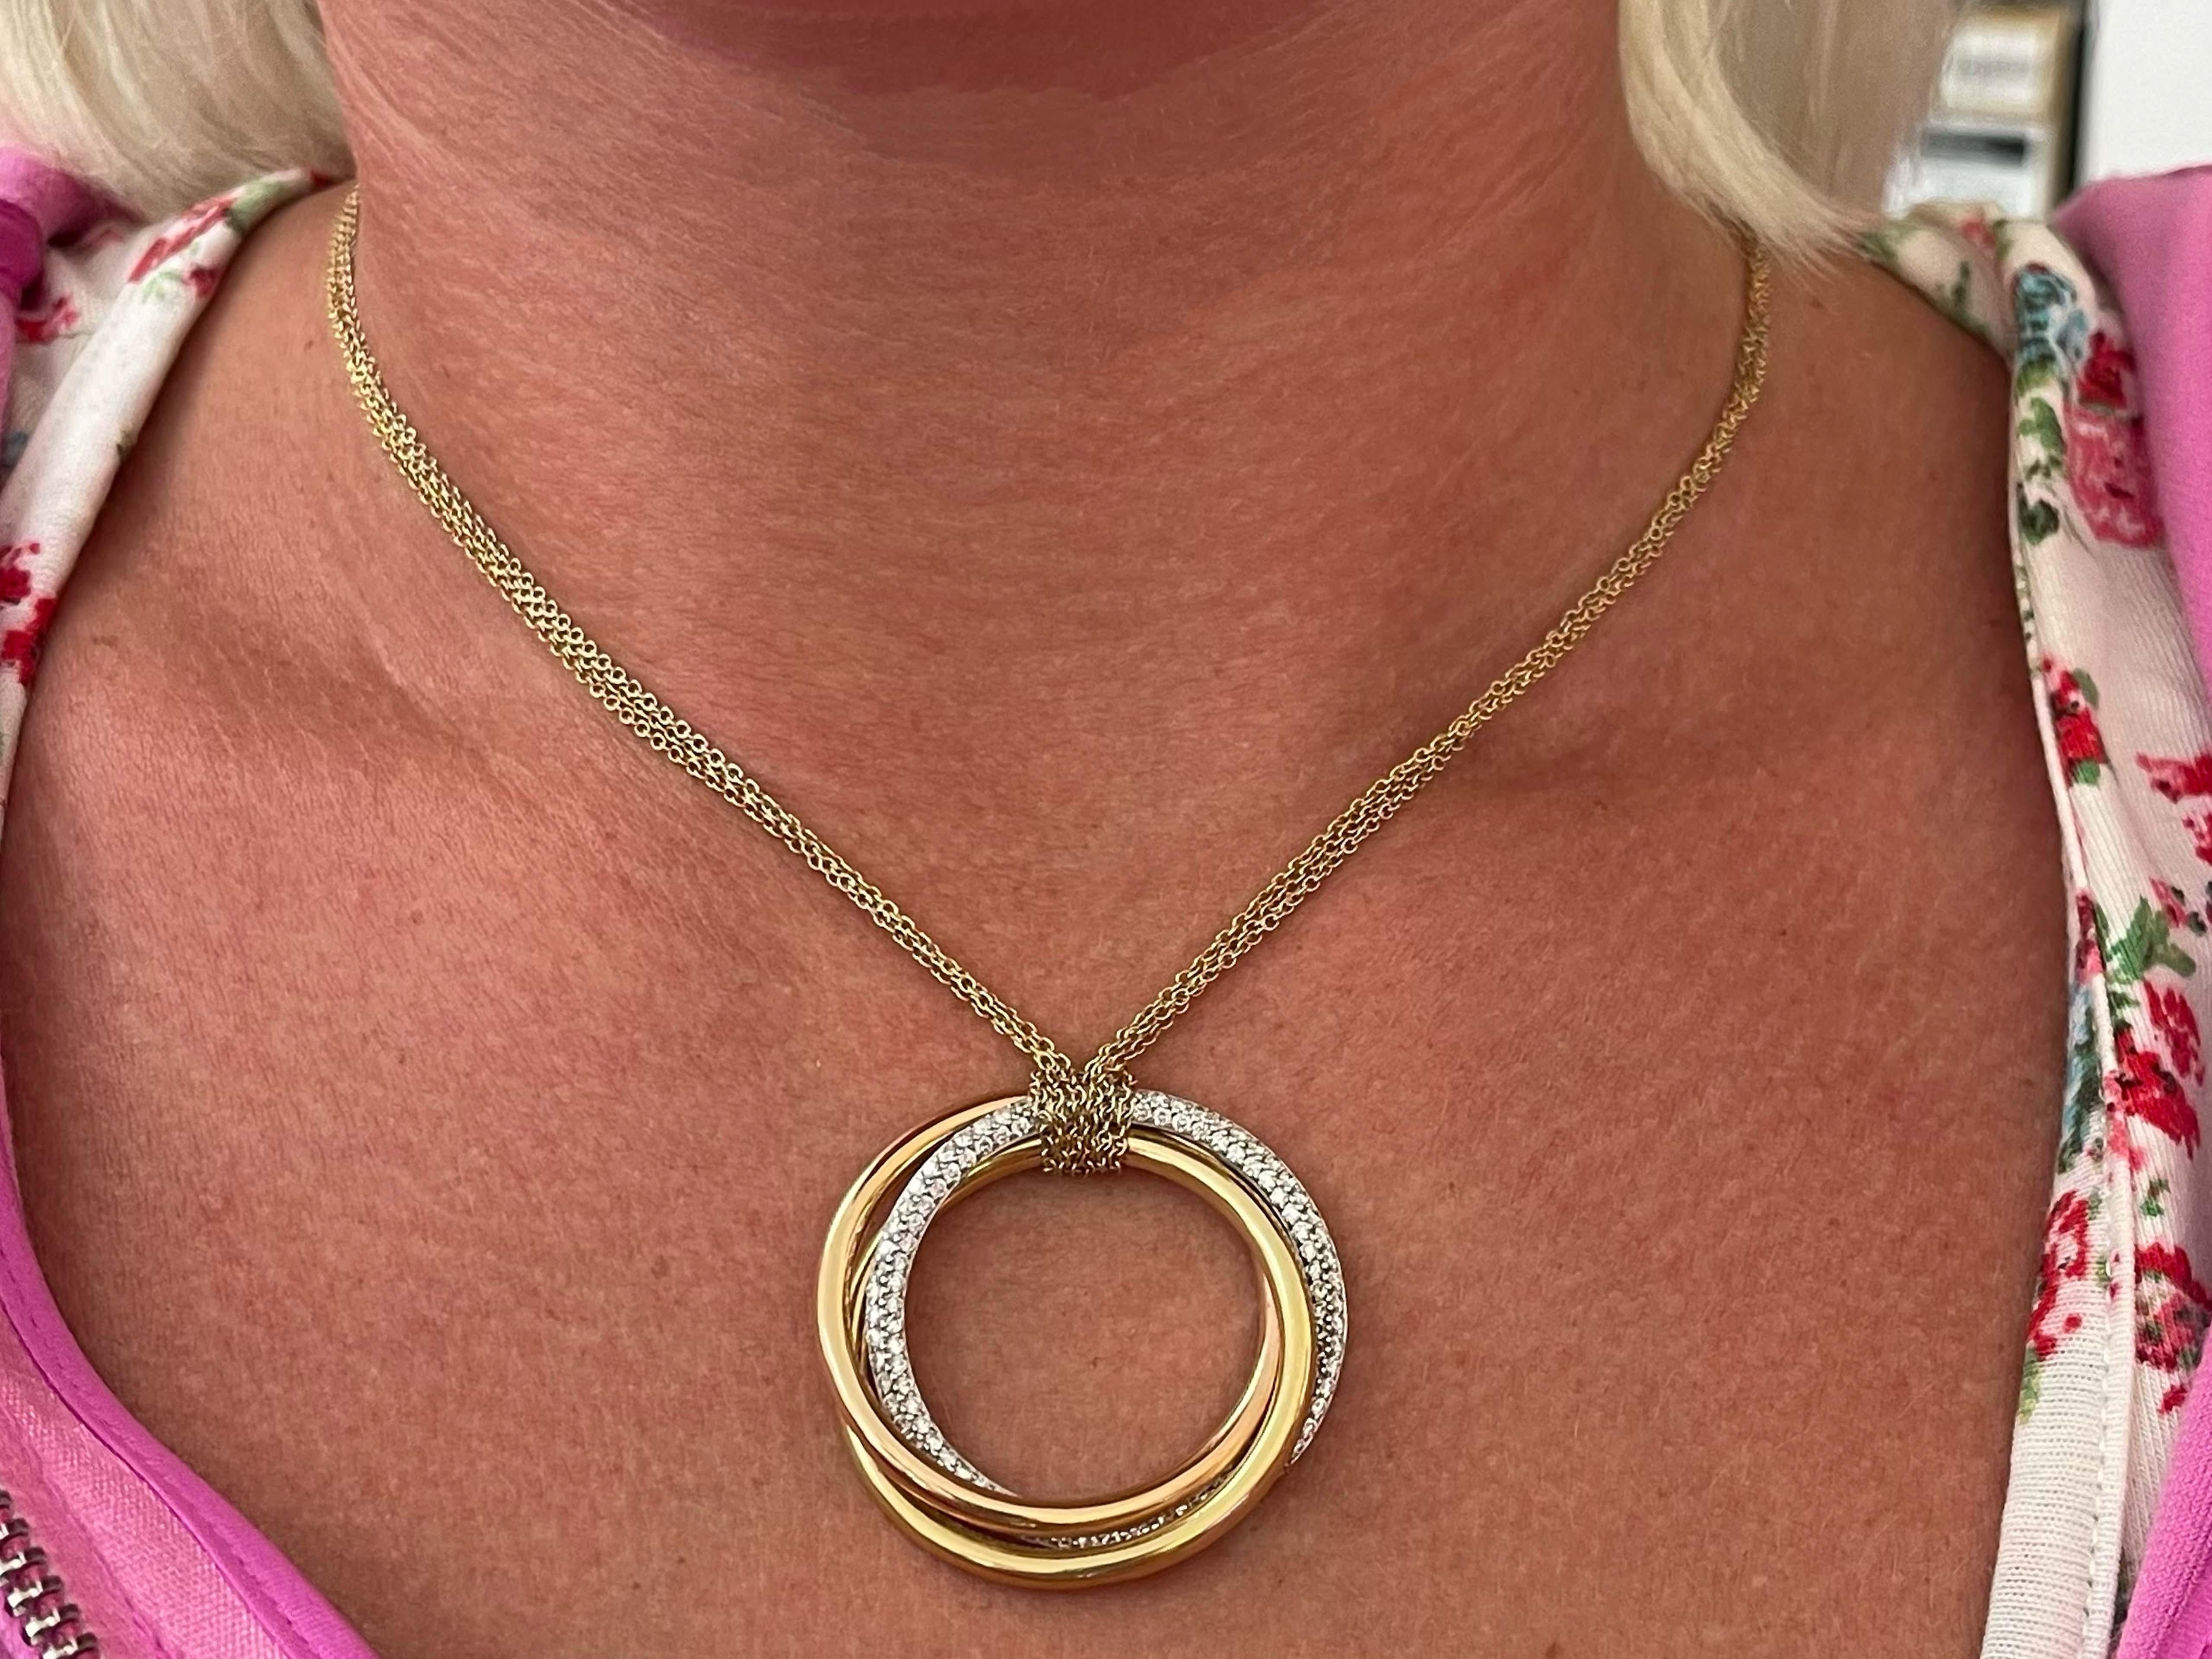 Trinity Diamond Necklace in 18k White Yellow & Rose Gold on Triple Strand Chain. The white gold ring is pave set with round brilliant-cut diamond totaling ~1.00 carats. The diamonds are G, VS. The rings measures 1.3